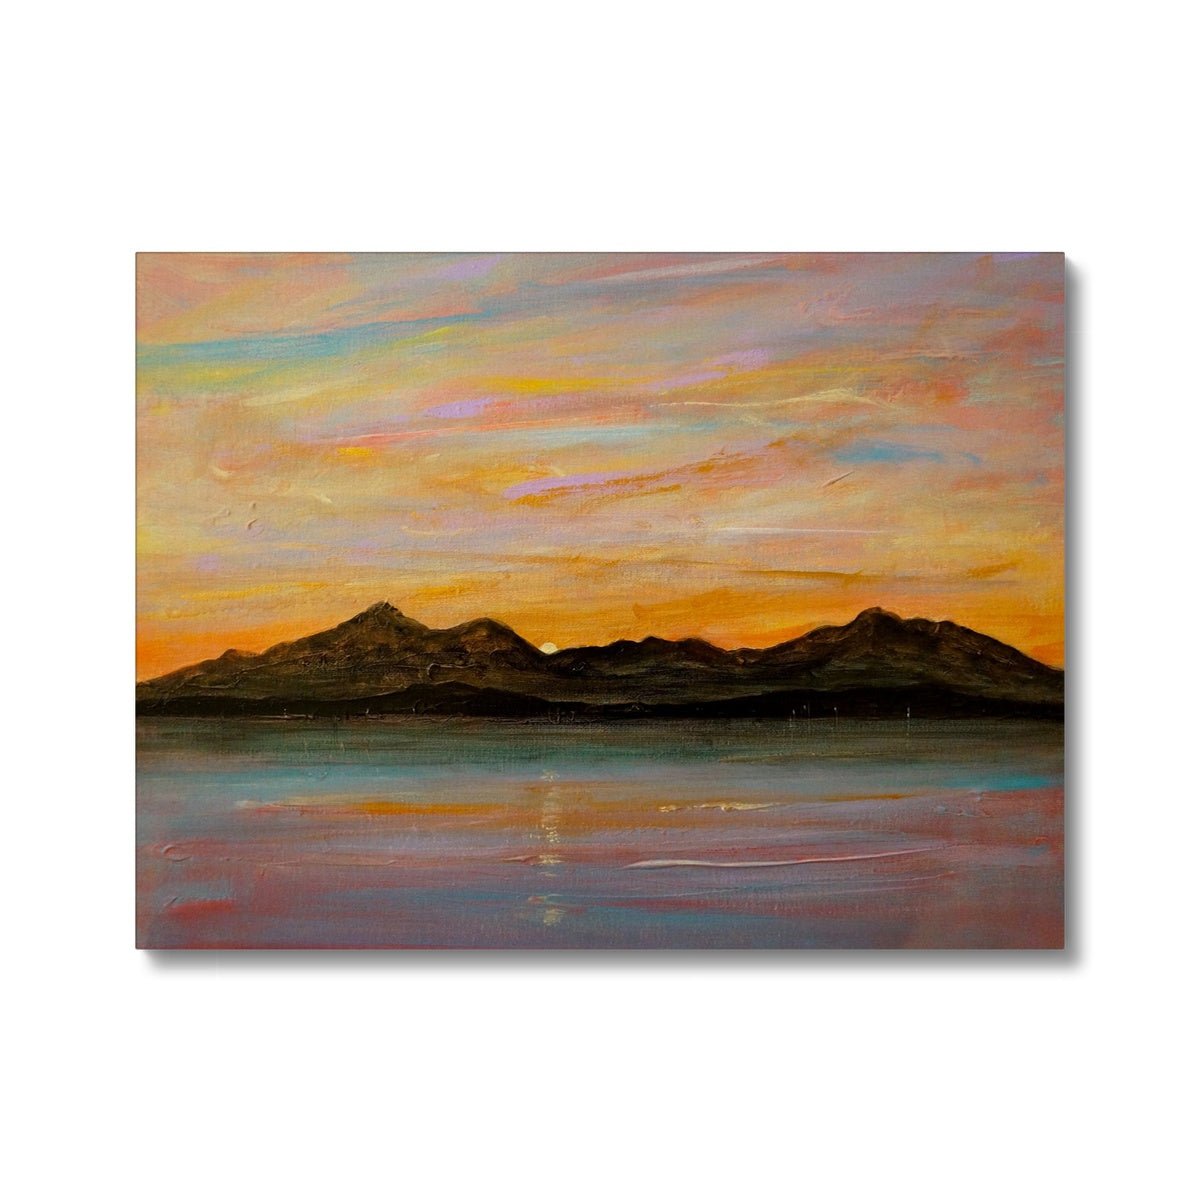 The Sleeping Warrior Arran Painting | Canvas From Scotland-Contemporary Stretched Canvas Prints-Arran Art Gallery-24"x18"-Paintings, Prints, Homeware, Art Gifts From Scotland By Scottish Artist Kevin Hunter